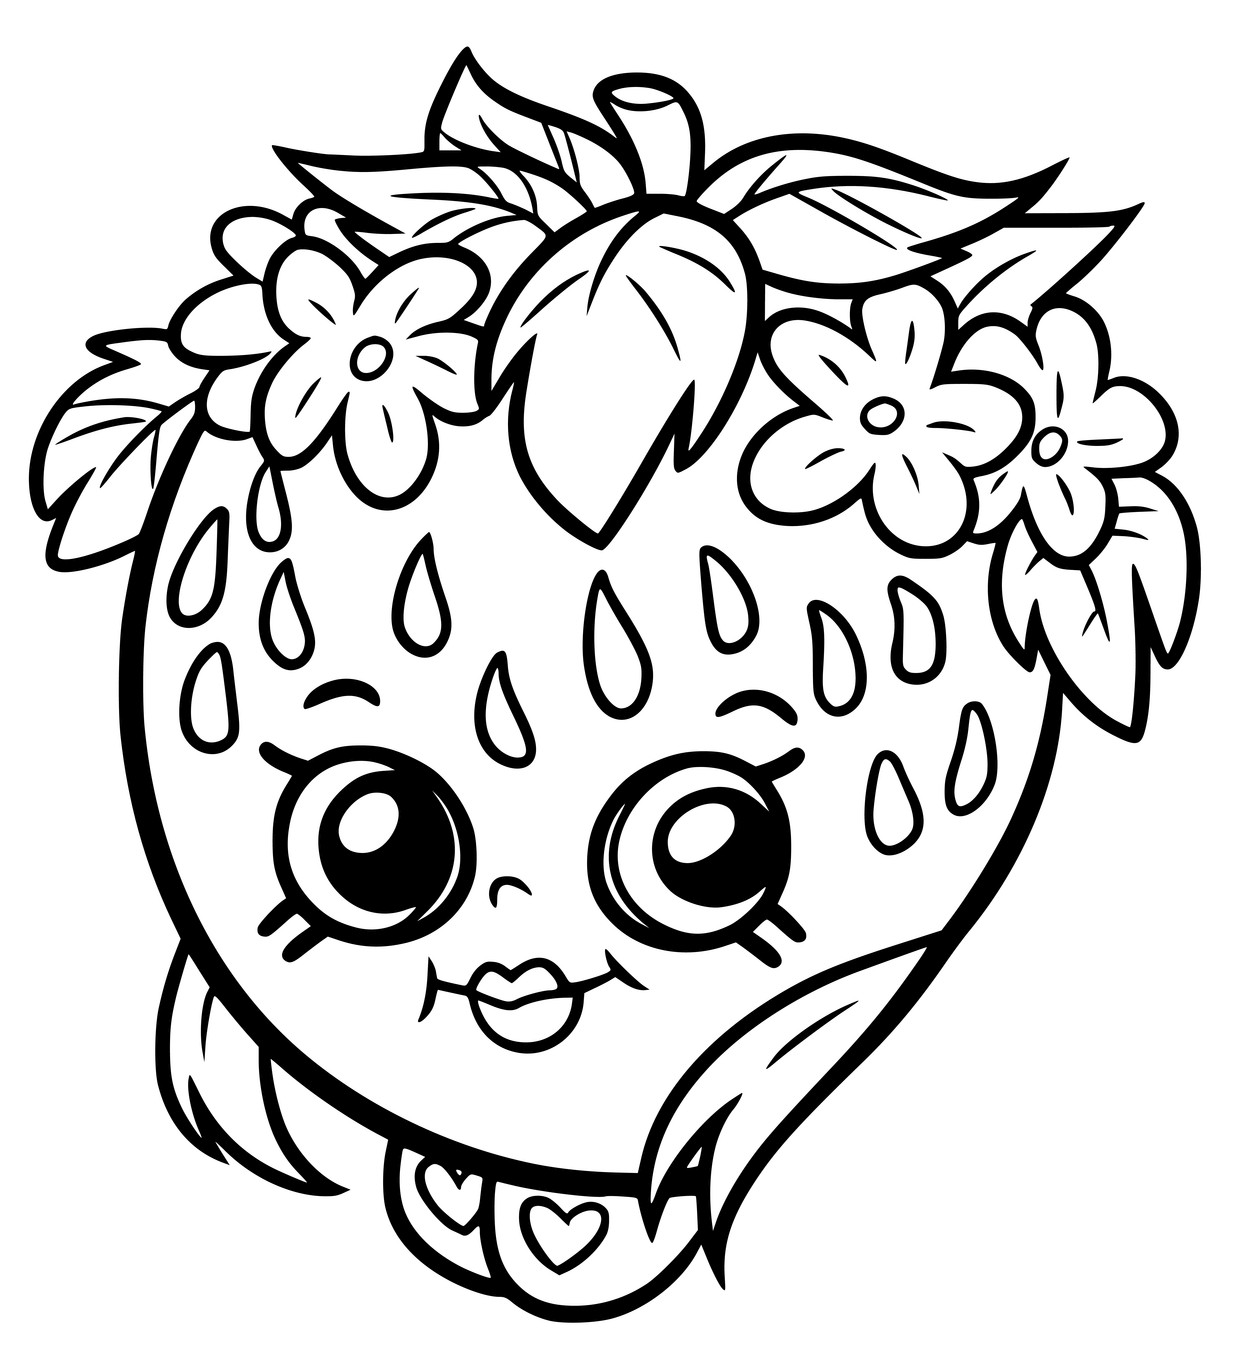 Shopkins Printable Coloring Pages
 Shopkins Coloring Pages 16